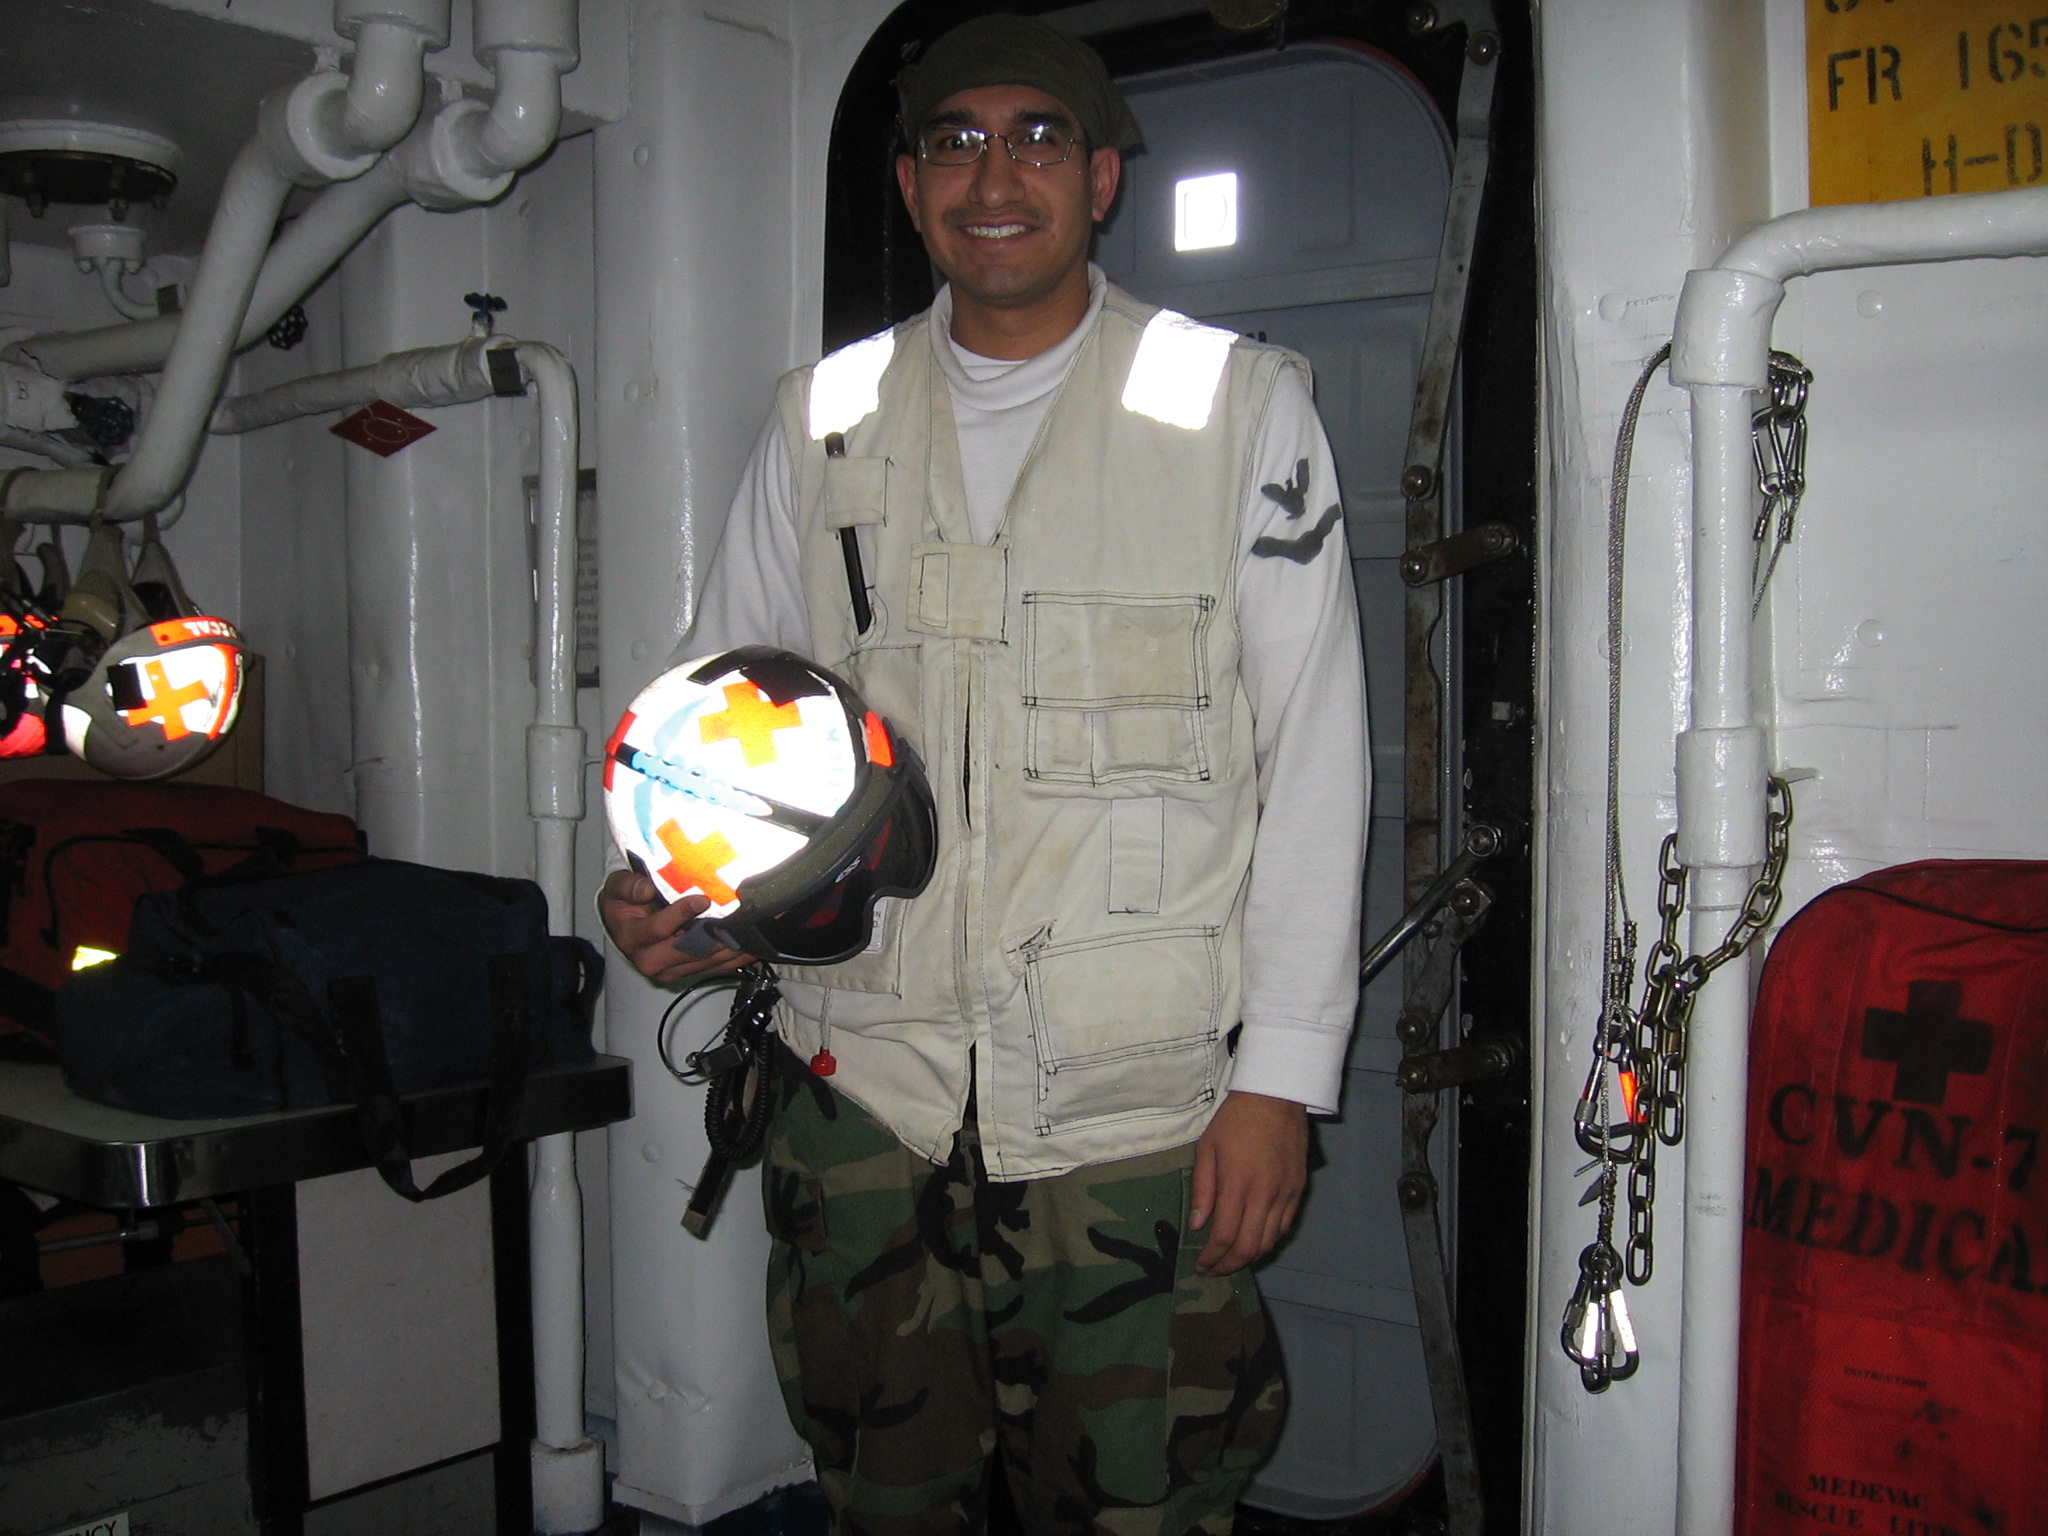 Montez in the flight deck battle station of the USS Theodore Roosevelt during Operation Iraqi Freedom.